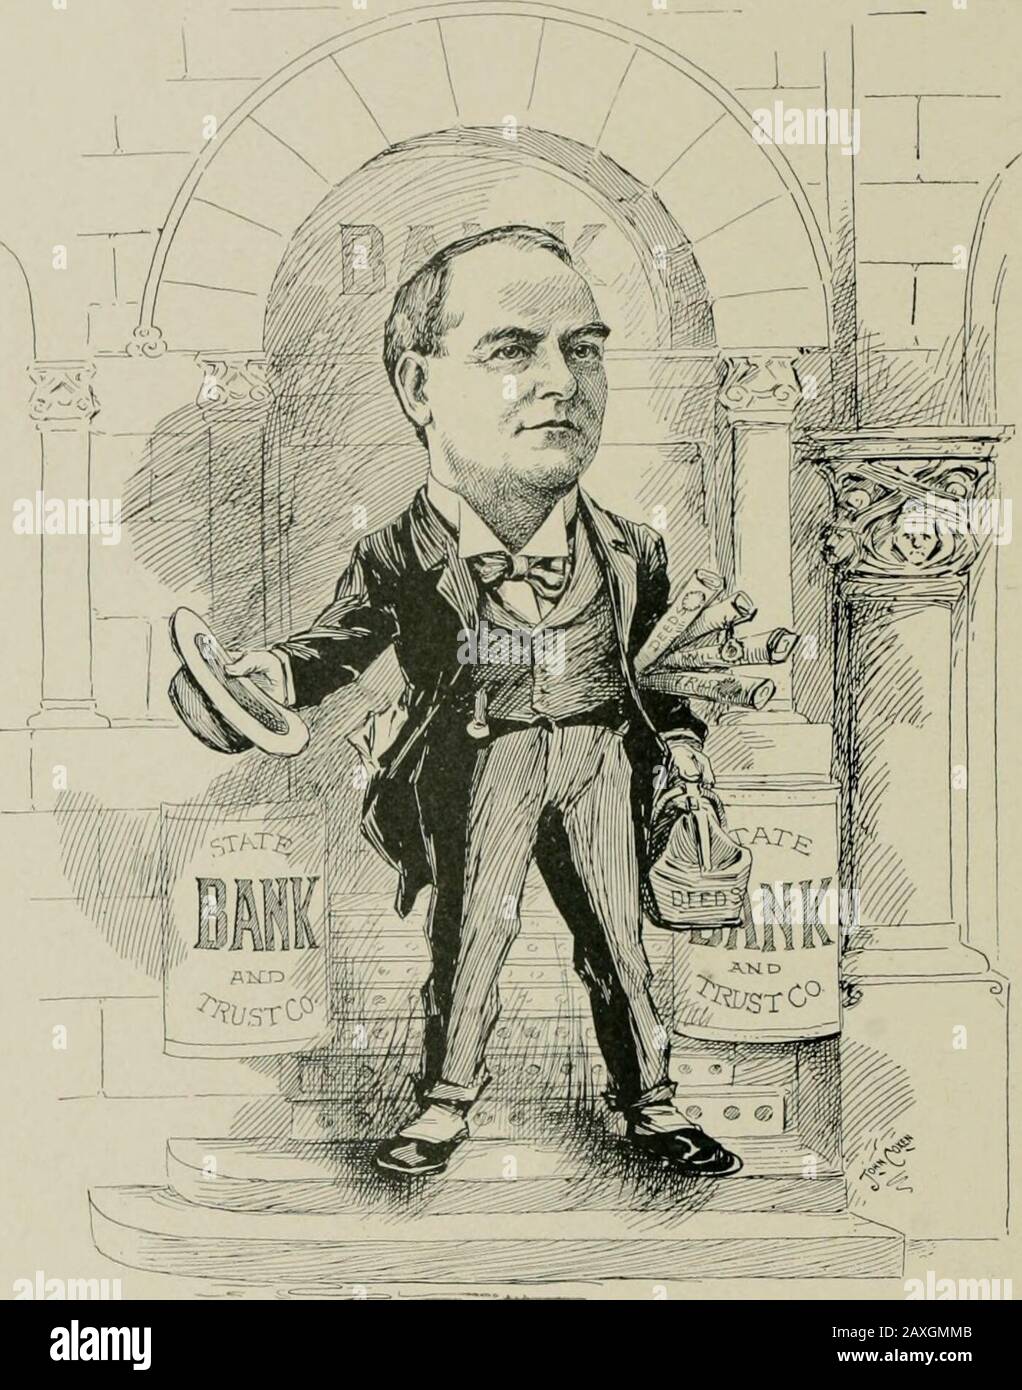 'As we see 'em,' a volume of cartoons and caricatures of Los Angeles citizens . R. L. HORTOX, Lawyer.. R. H. HOWELL,Vice President State Bank and Trust Co. Stock Photo